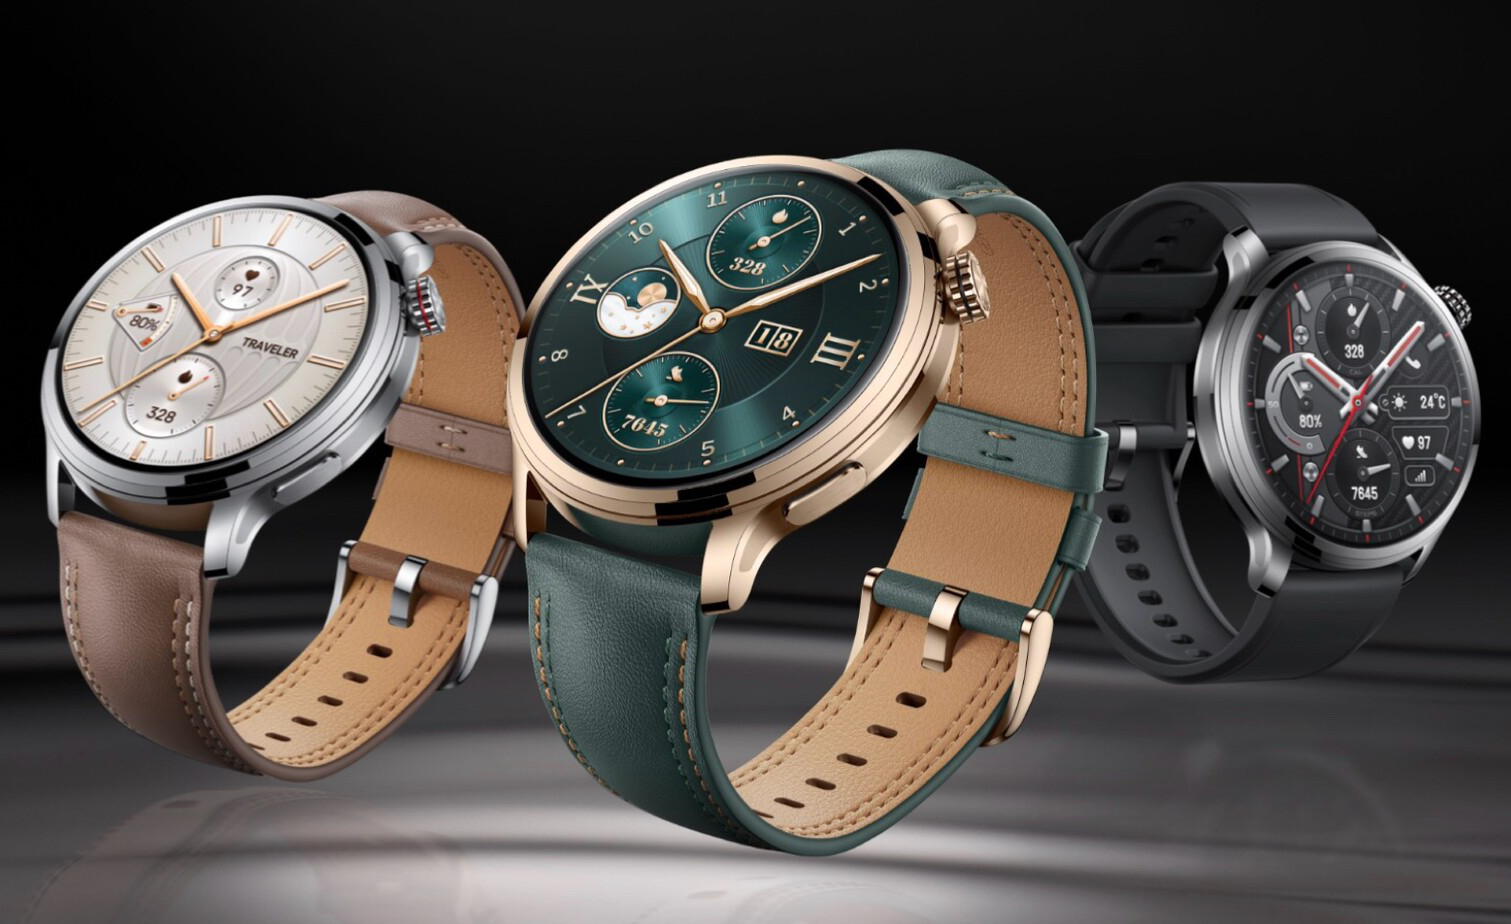 Honor Watch 4 smartwatch announced in Europe at €149 - Huawei Central